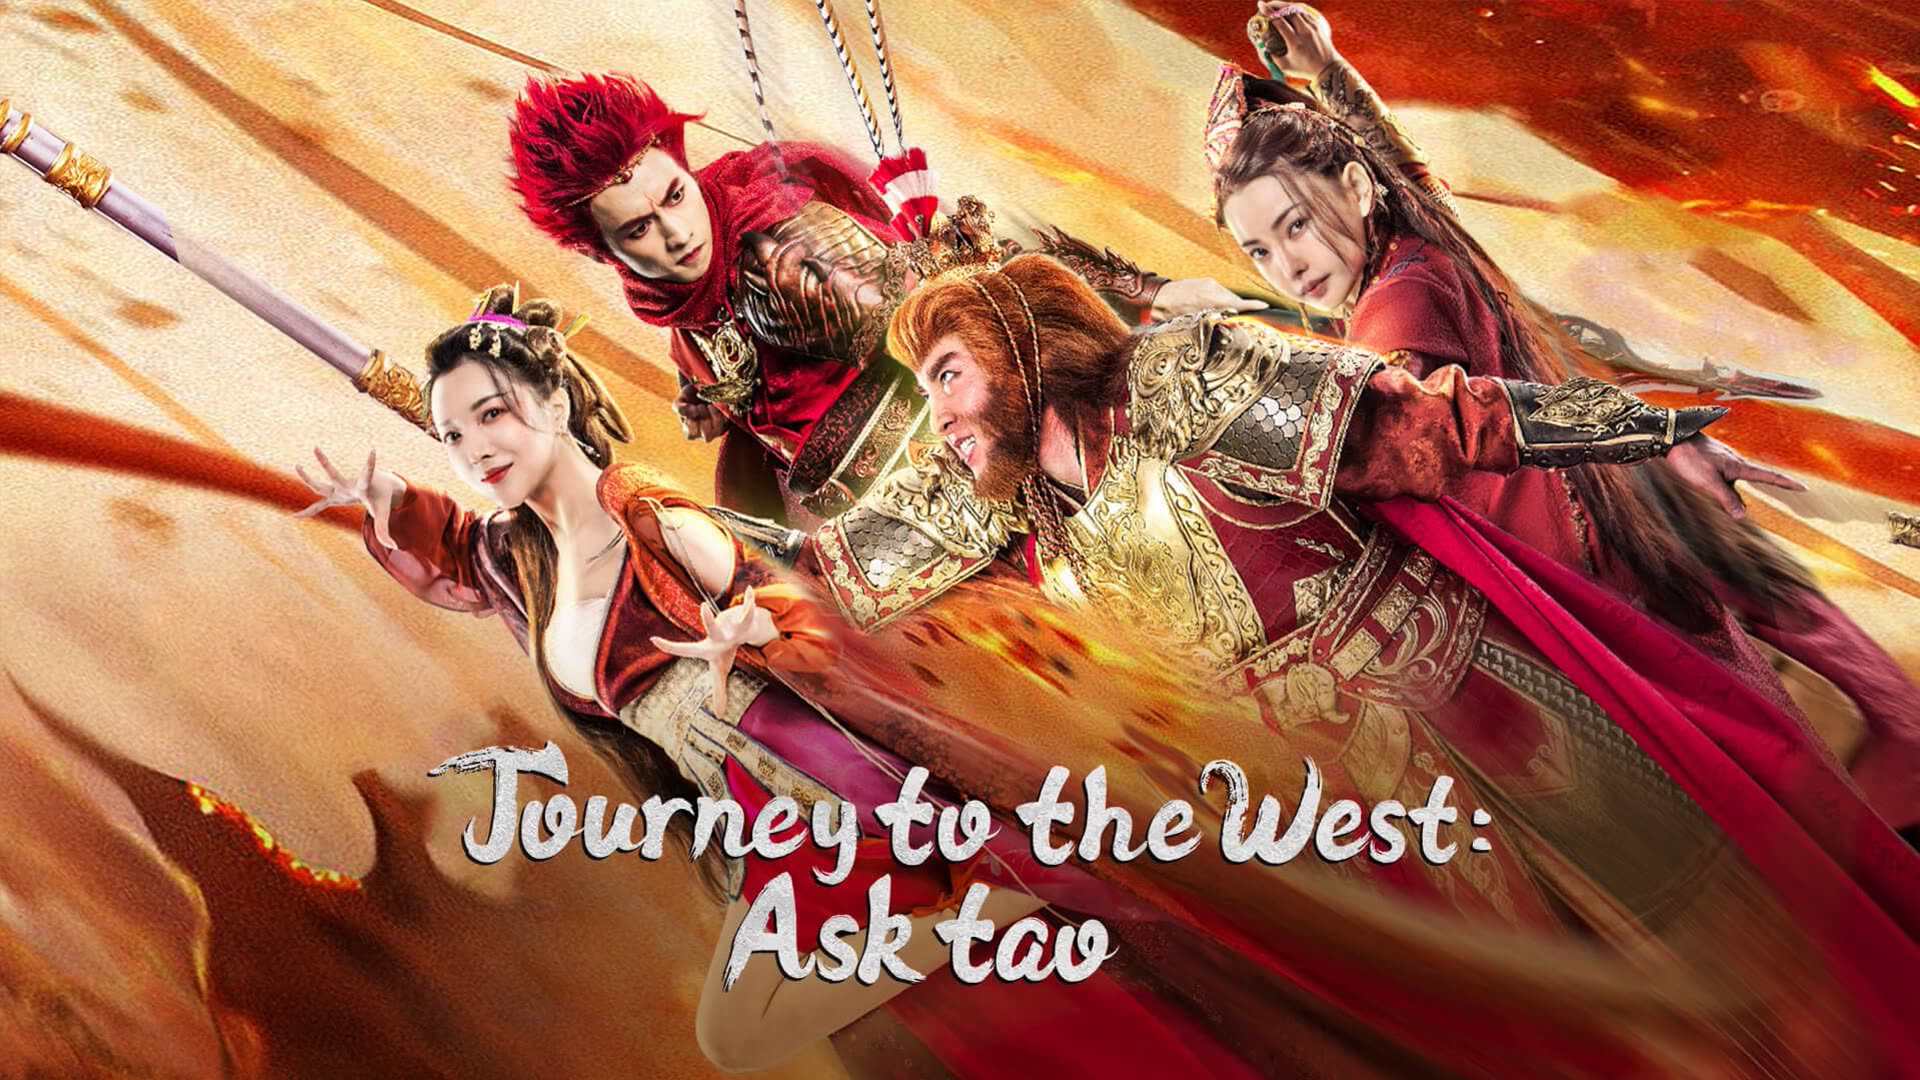 Tây Du Vấn Đạo Journey to the West: Ask tao